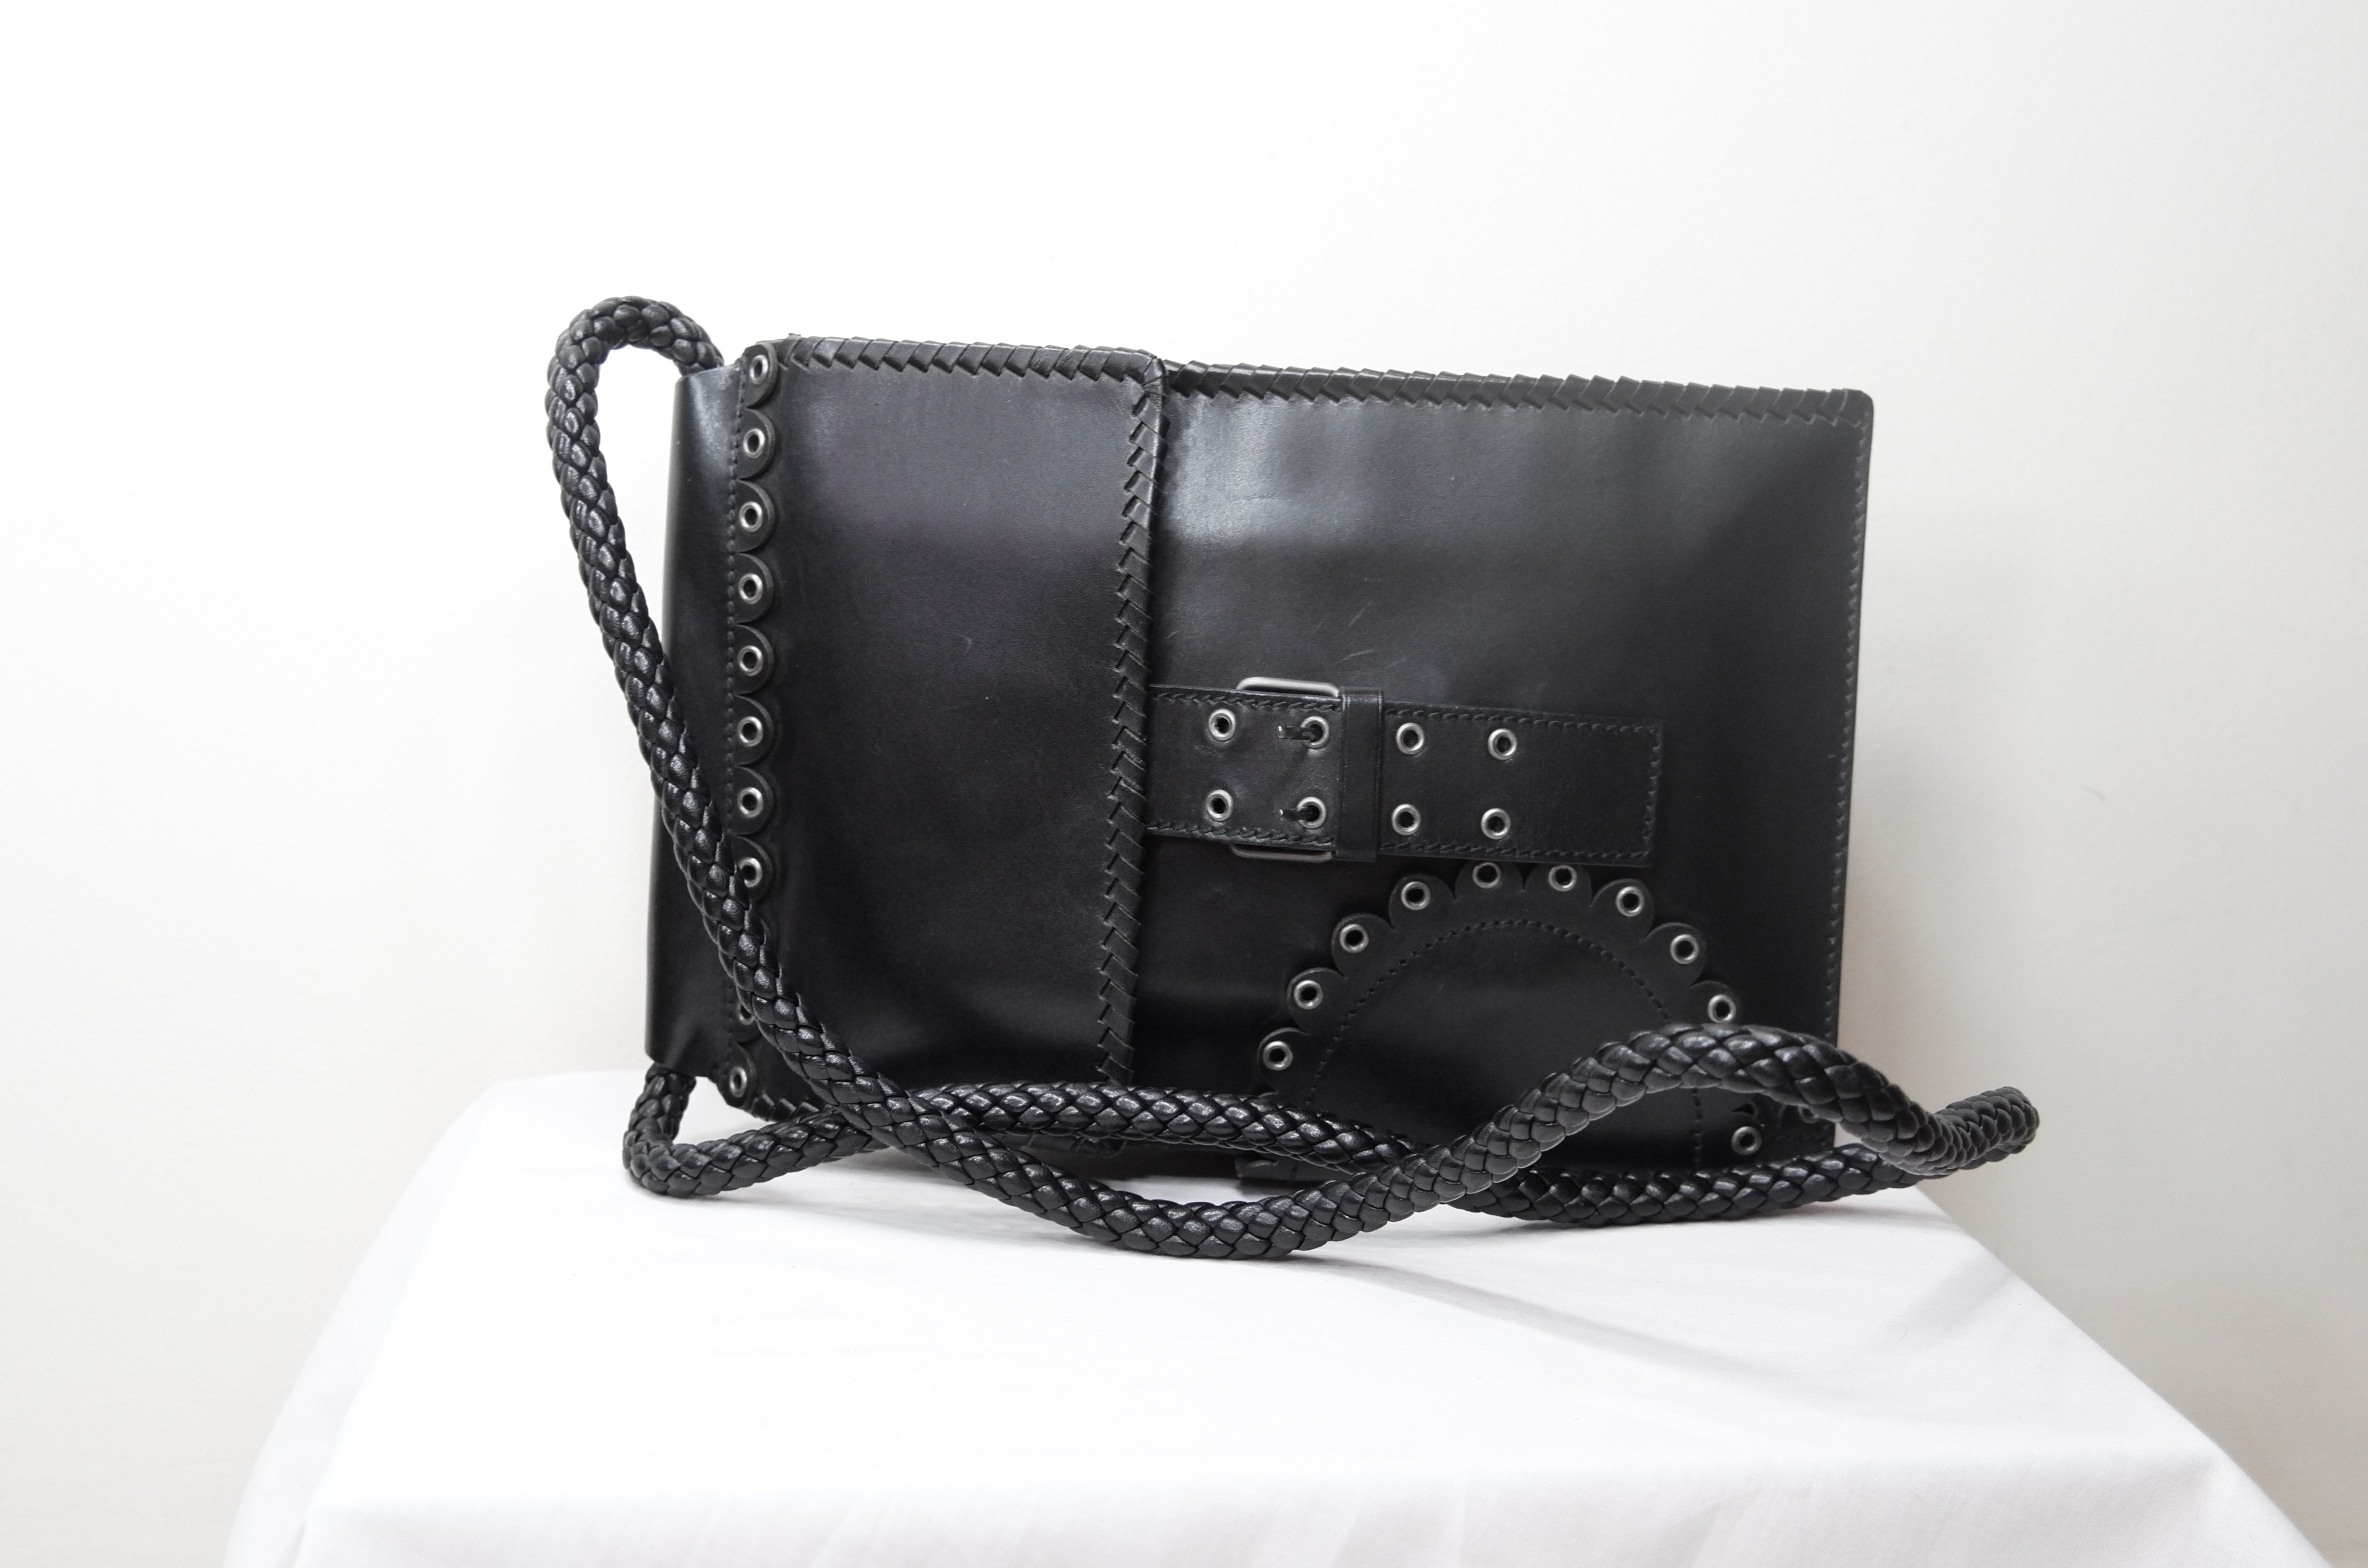 Tom Ford for Yves Saint Laurent Rive Gauche Black Leather Iconic Crossbody